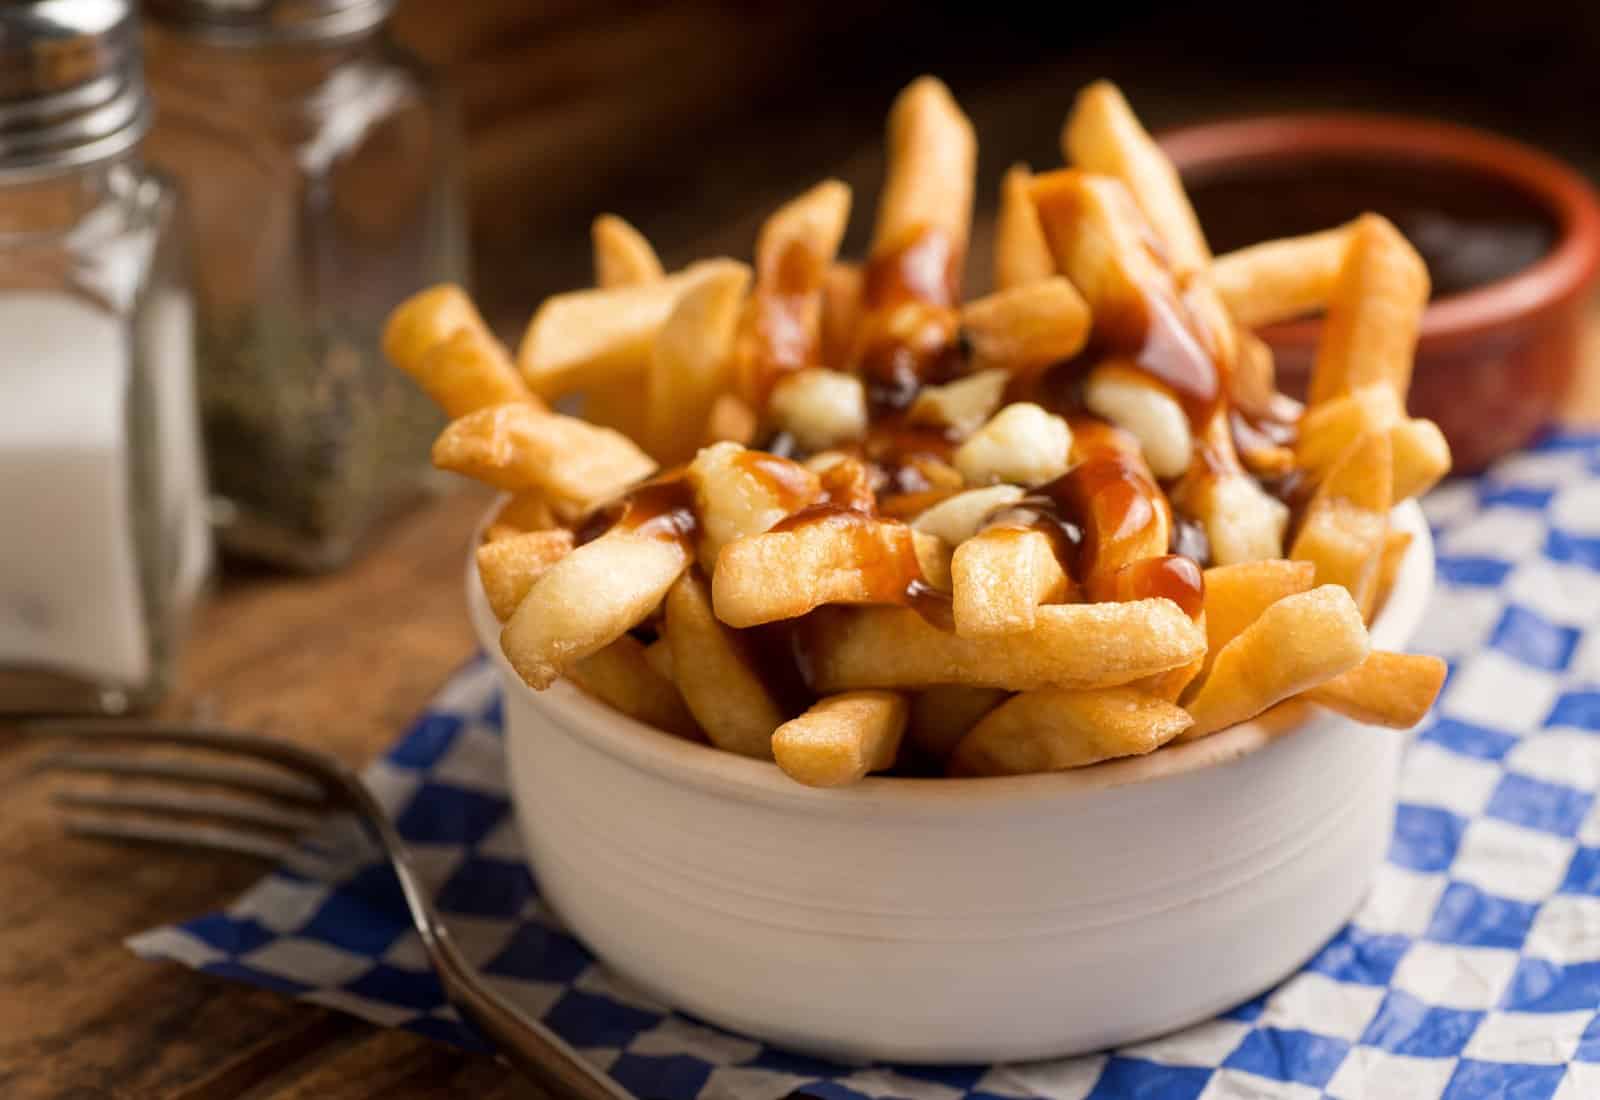 Image Credit: Shutterstock / Foodio <p>A hearty dish of fries topped with cheese curds and smothered in brown gravy; it’s comfort food at its best.</p>